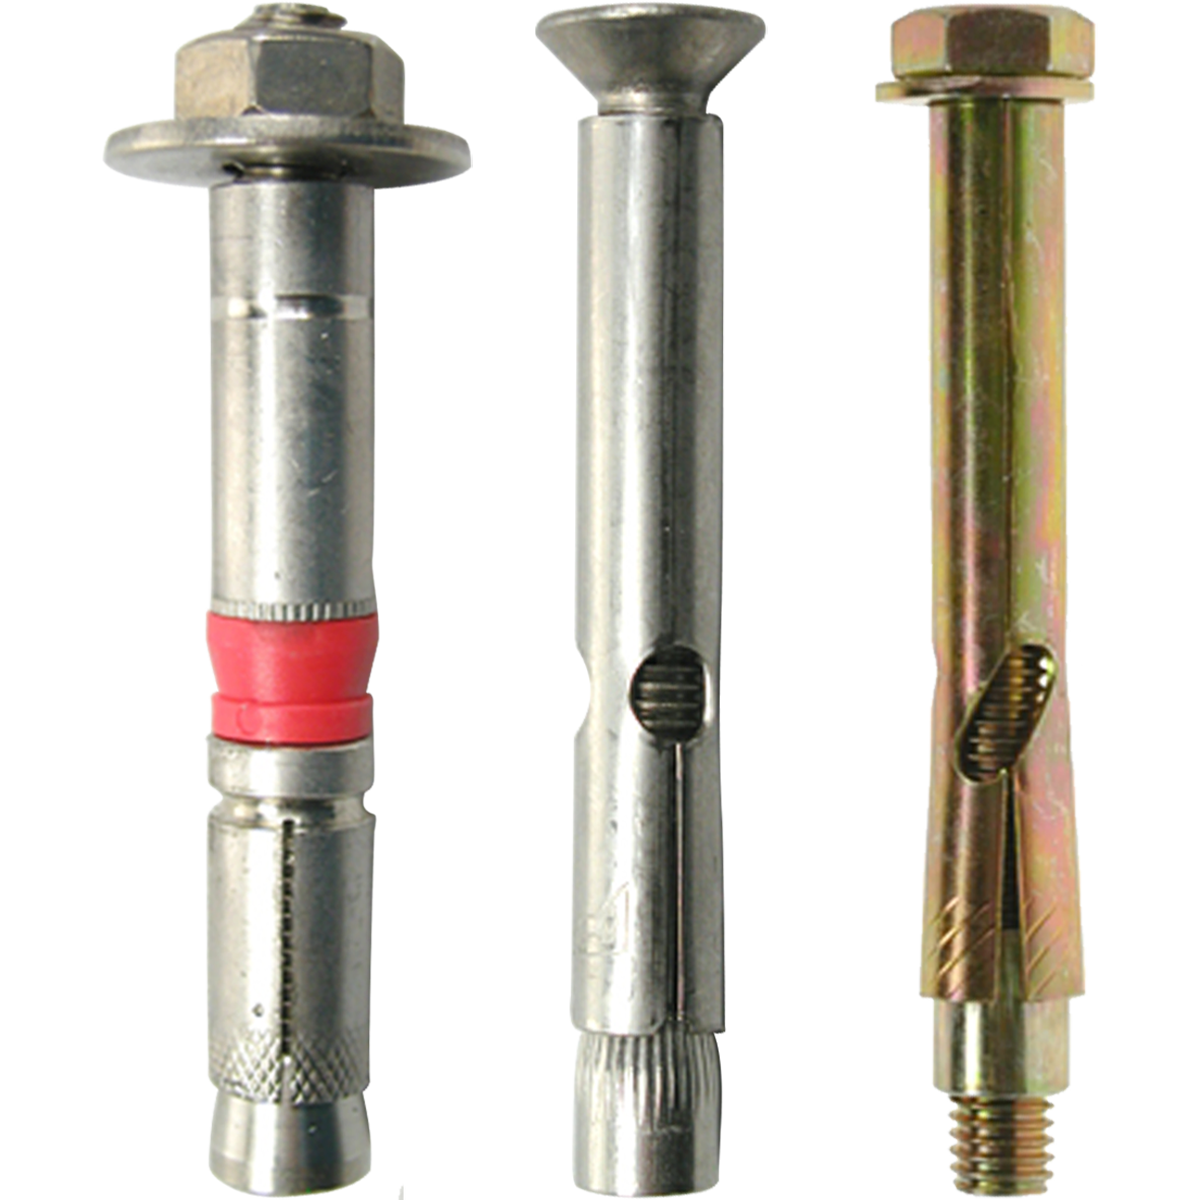 Sleeve anchor bolts. Used as an effective fixing for use with various substrates like concrete, stone, and brickwork